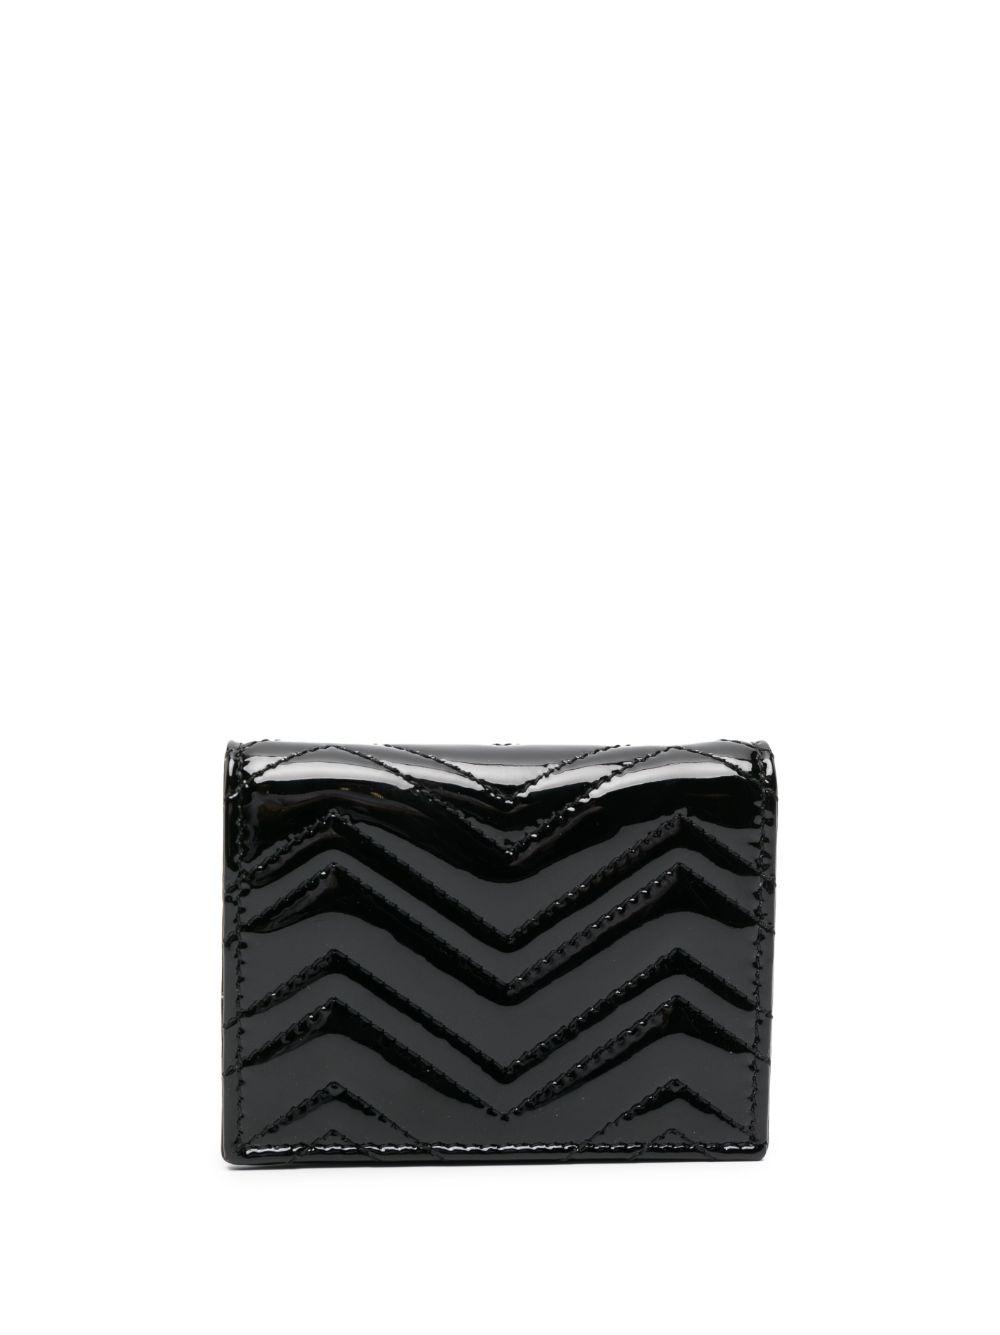 GUCCI - Gg Marmont Leather Credit Card Case Gucci